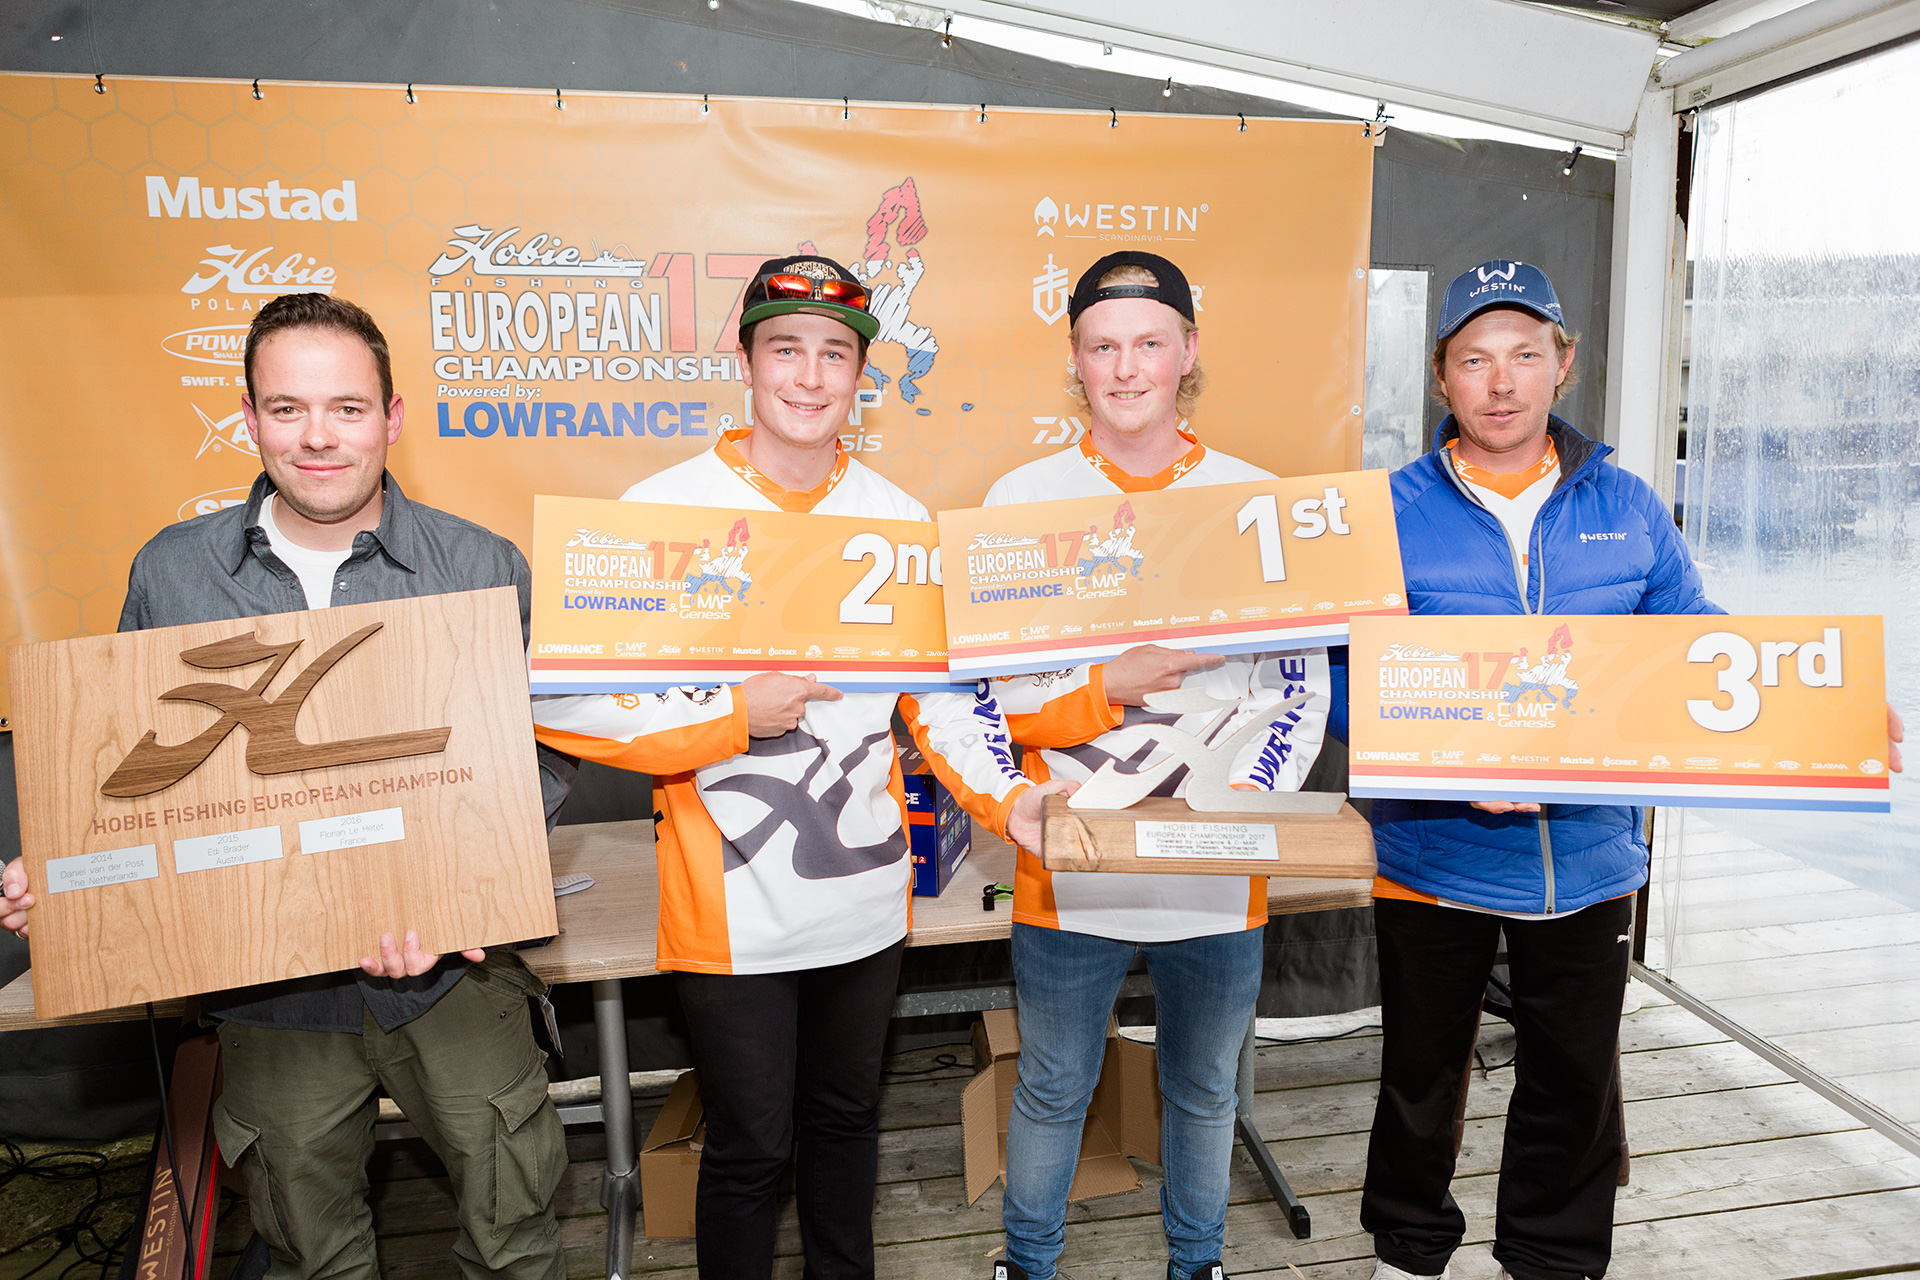 This were the 4th Hobie Fishing European Championships powered by Lowrance & C-MAP